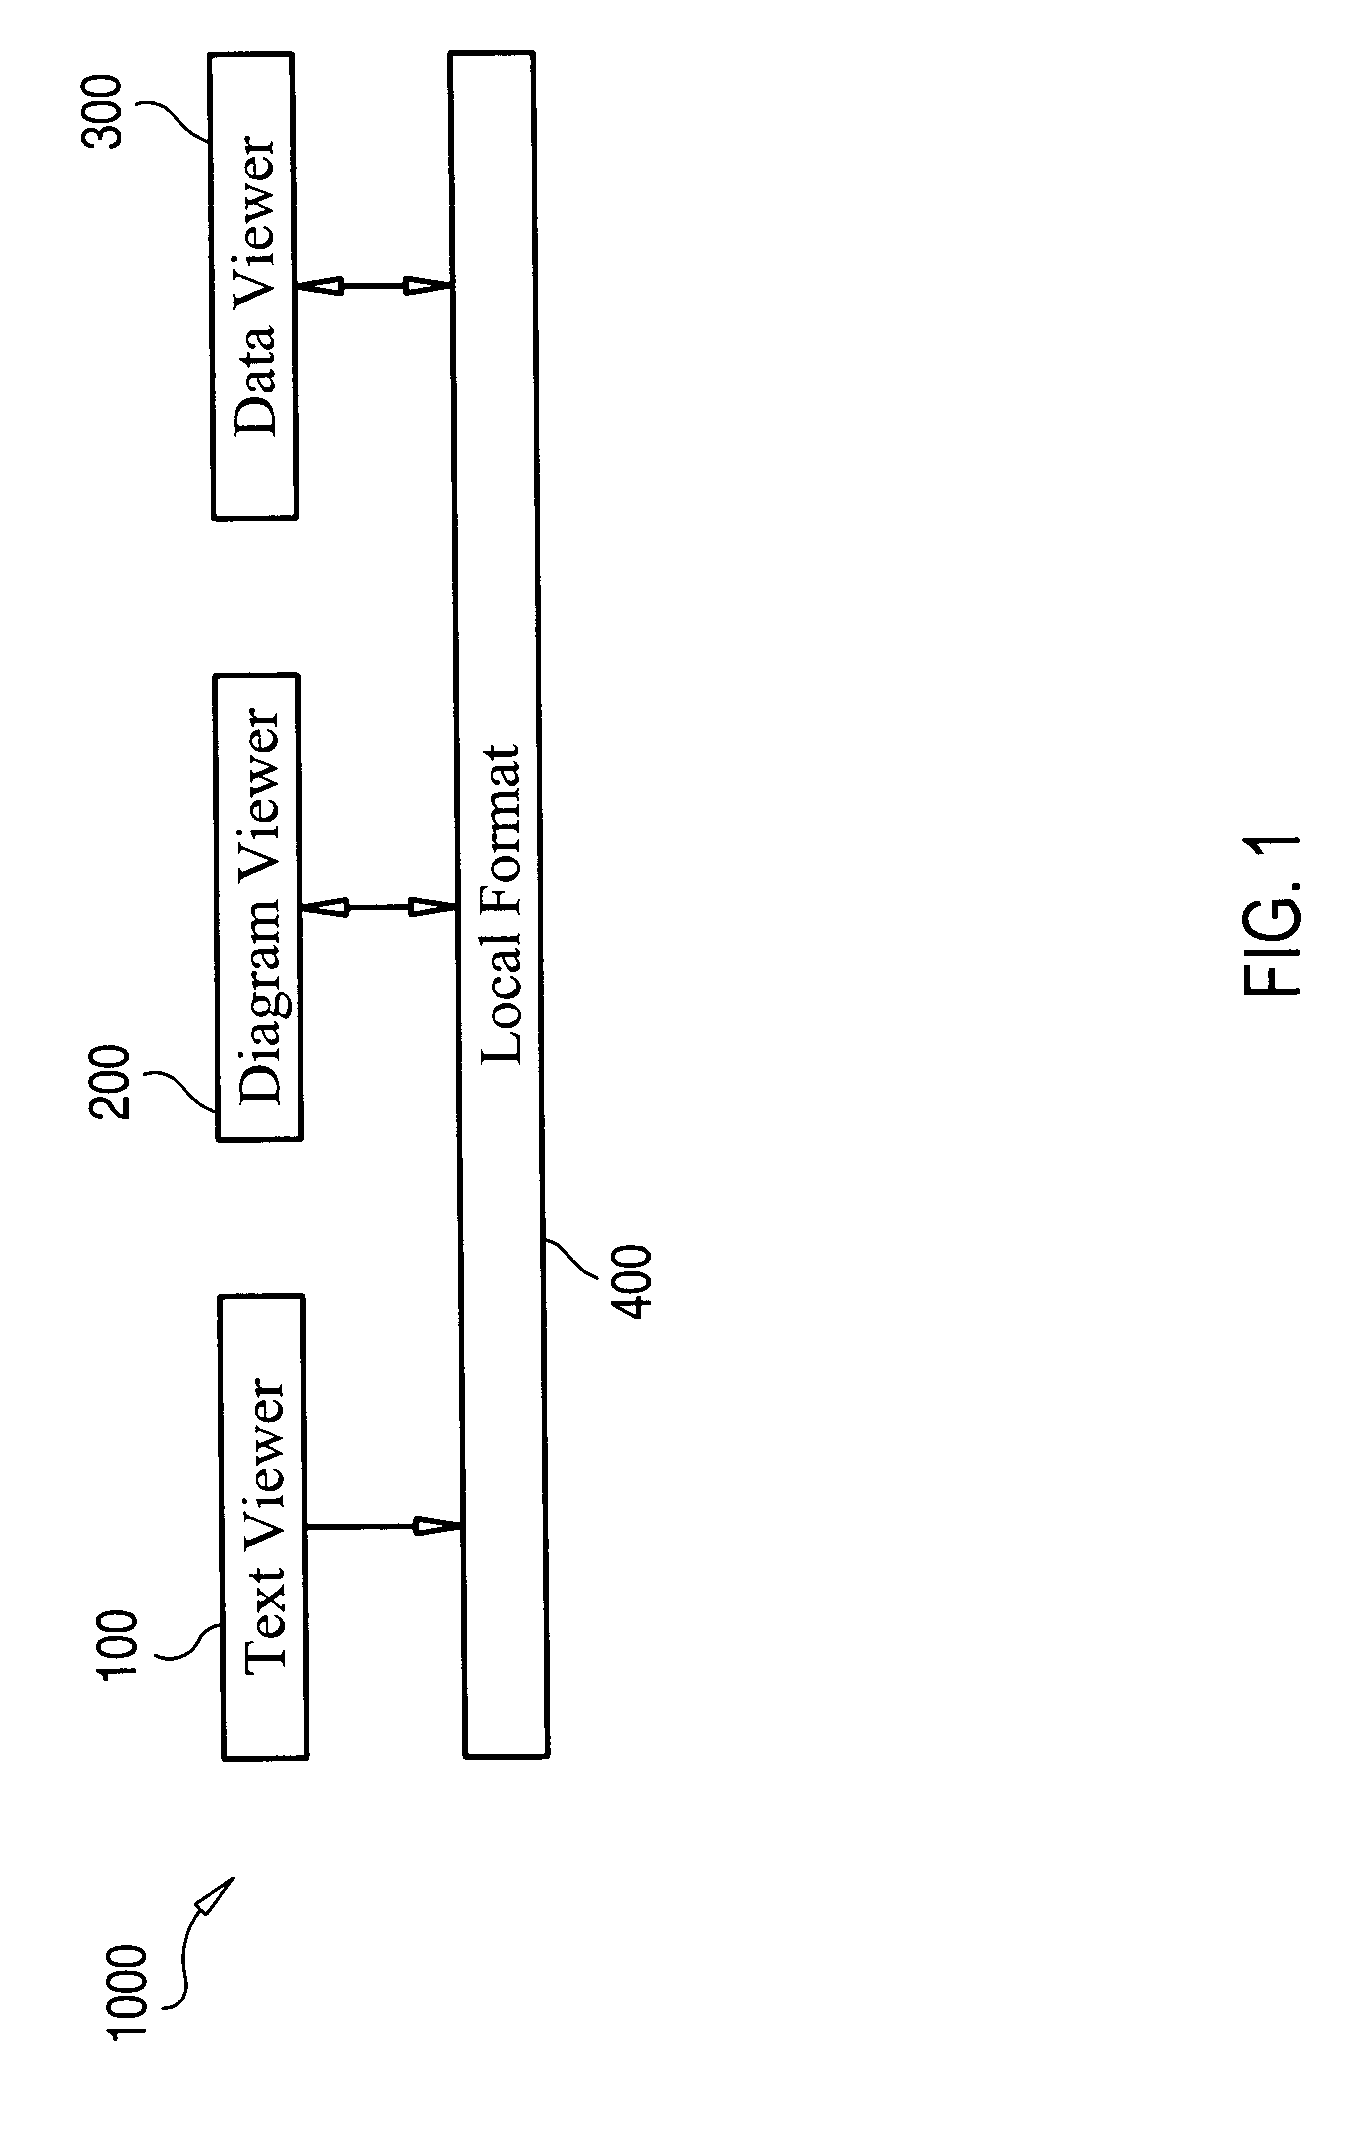 System, tools and methods for viewing textual documents, extracting knowledge therefrom and converting the knowledge into other forms of representation of the knowledge